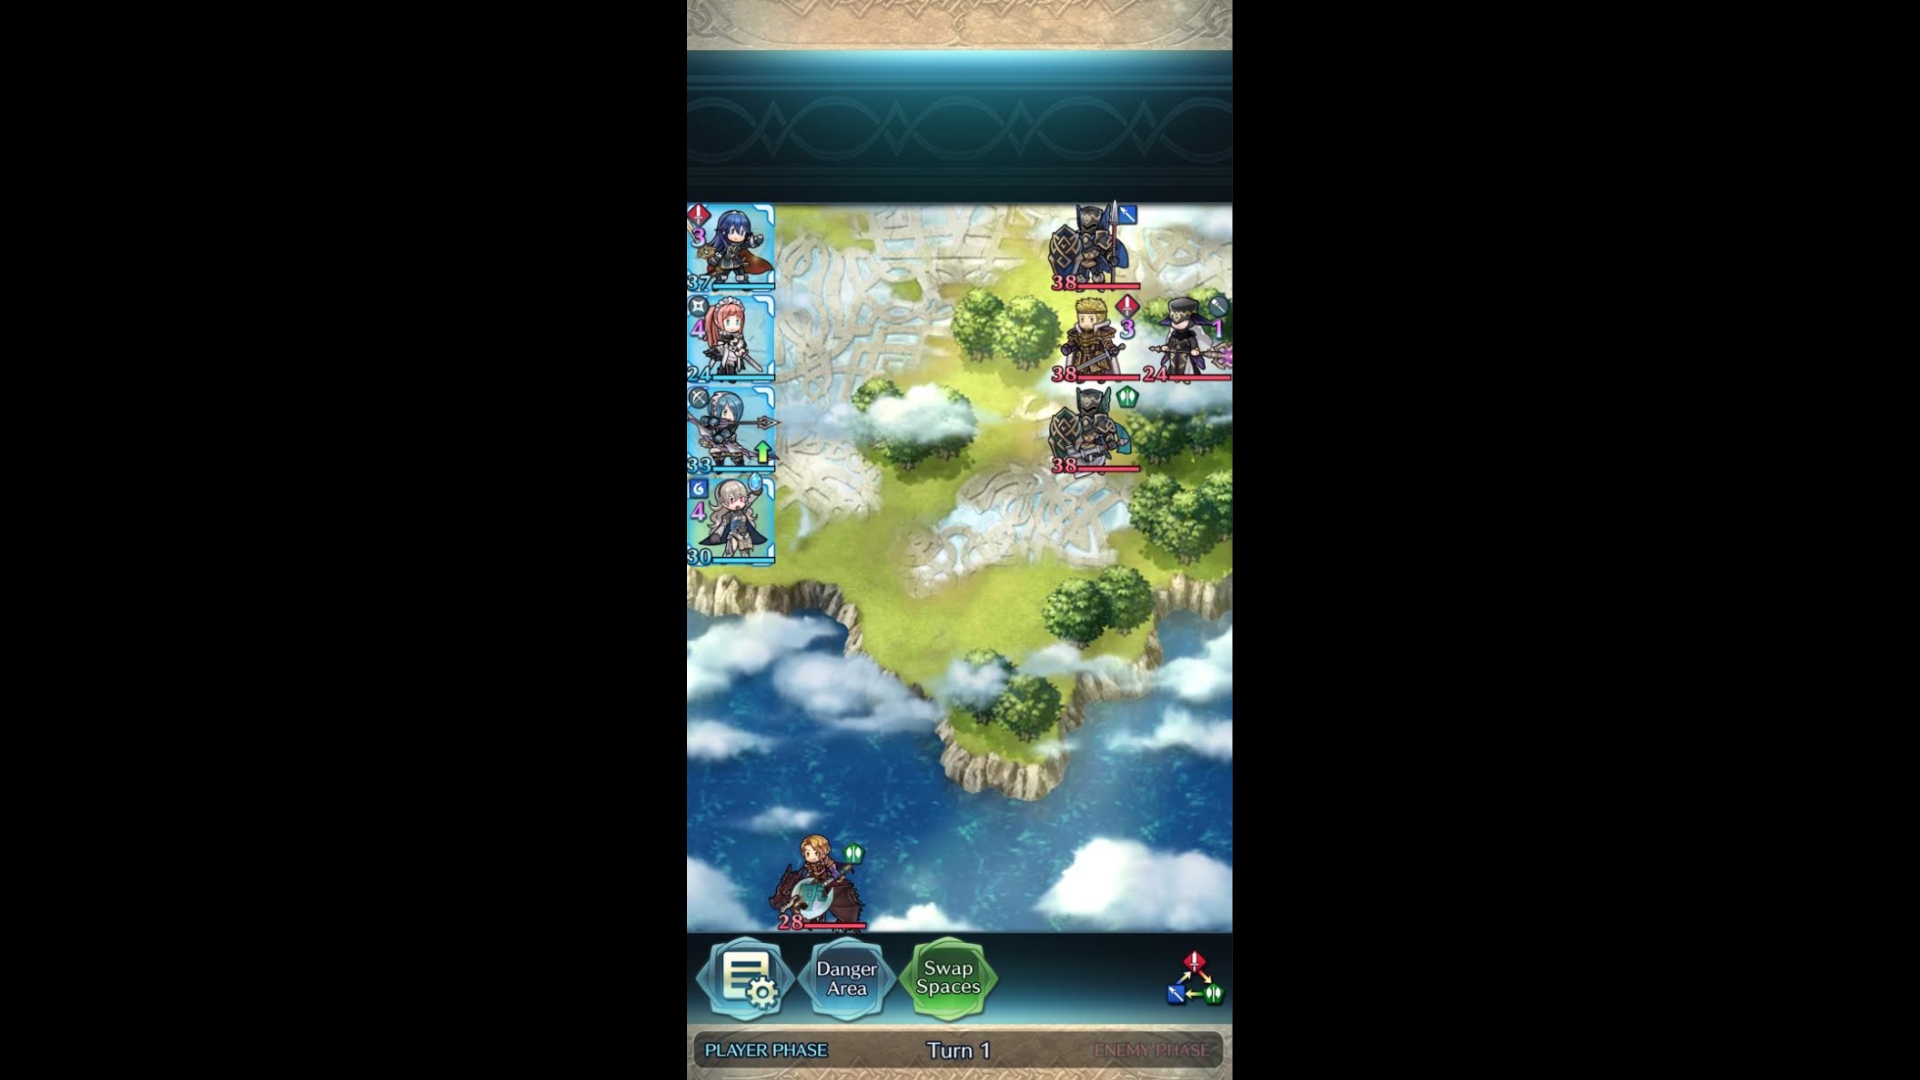 Addictive games - Fire Emblem Heroes. Image shows a selection of characters in a grid-based map.